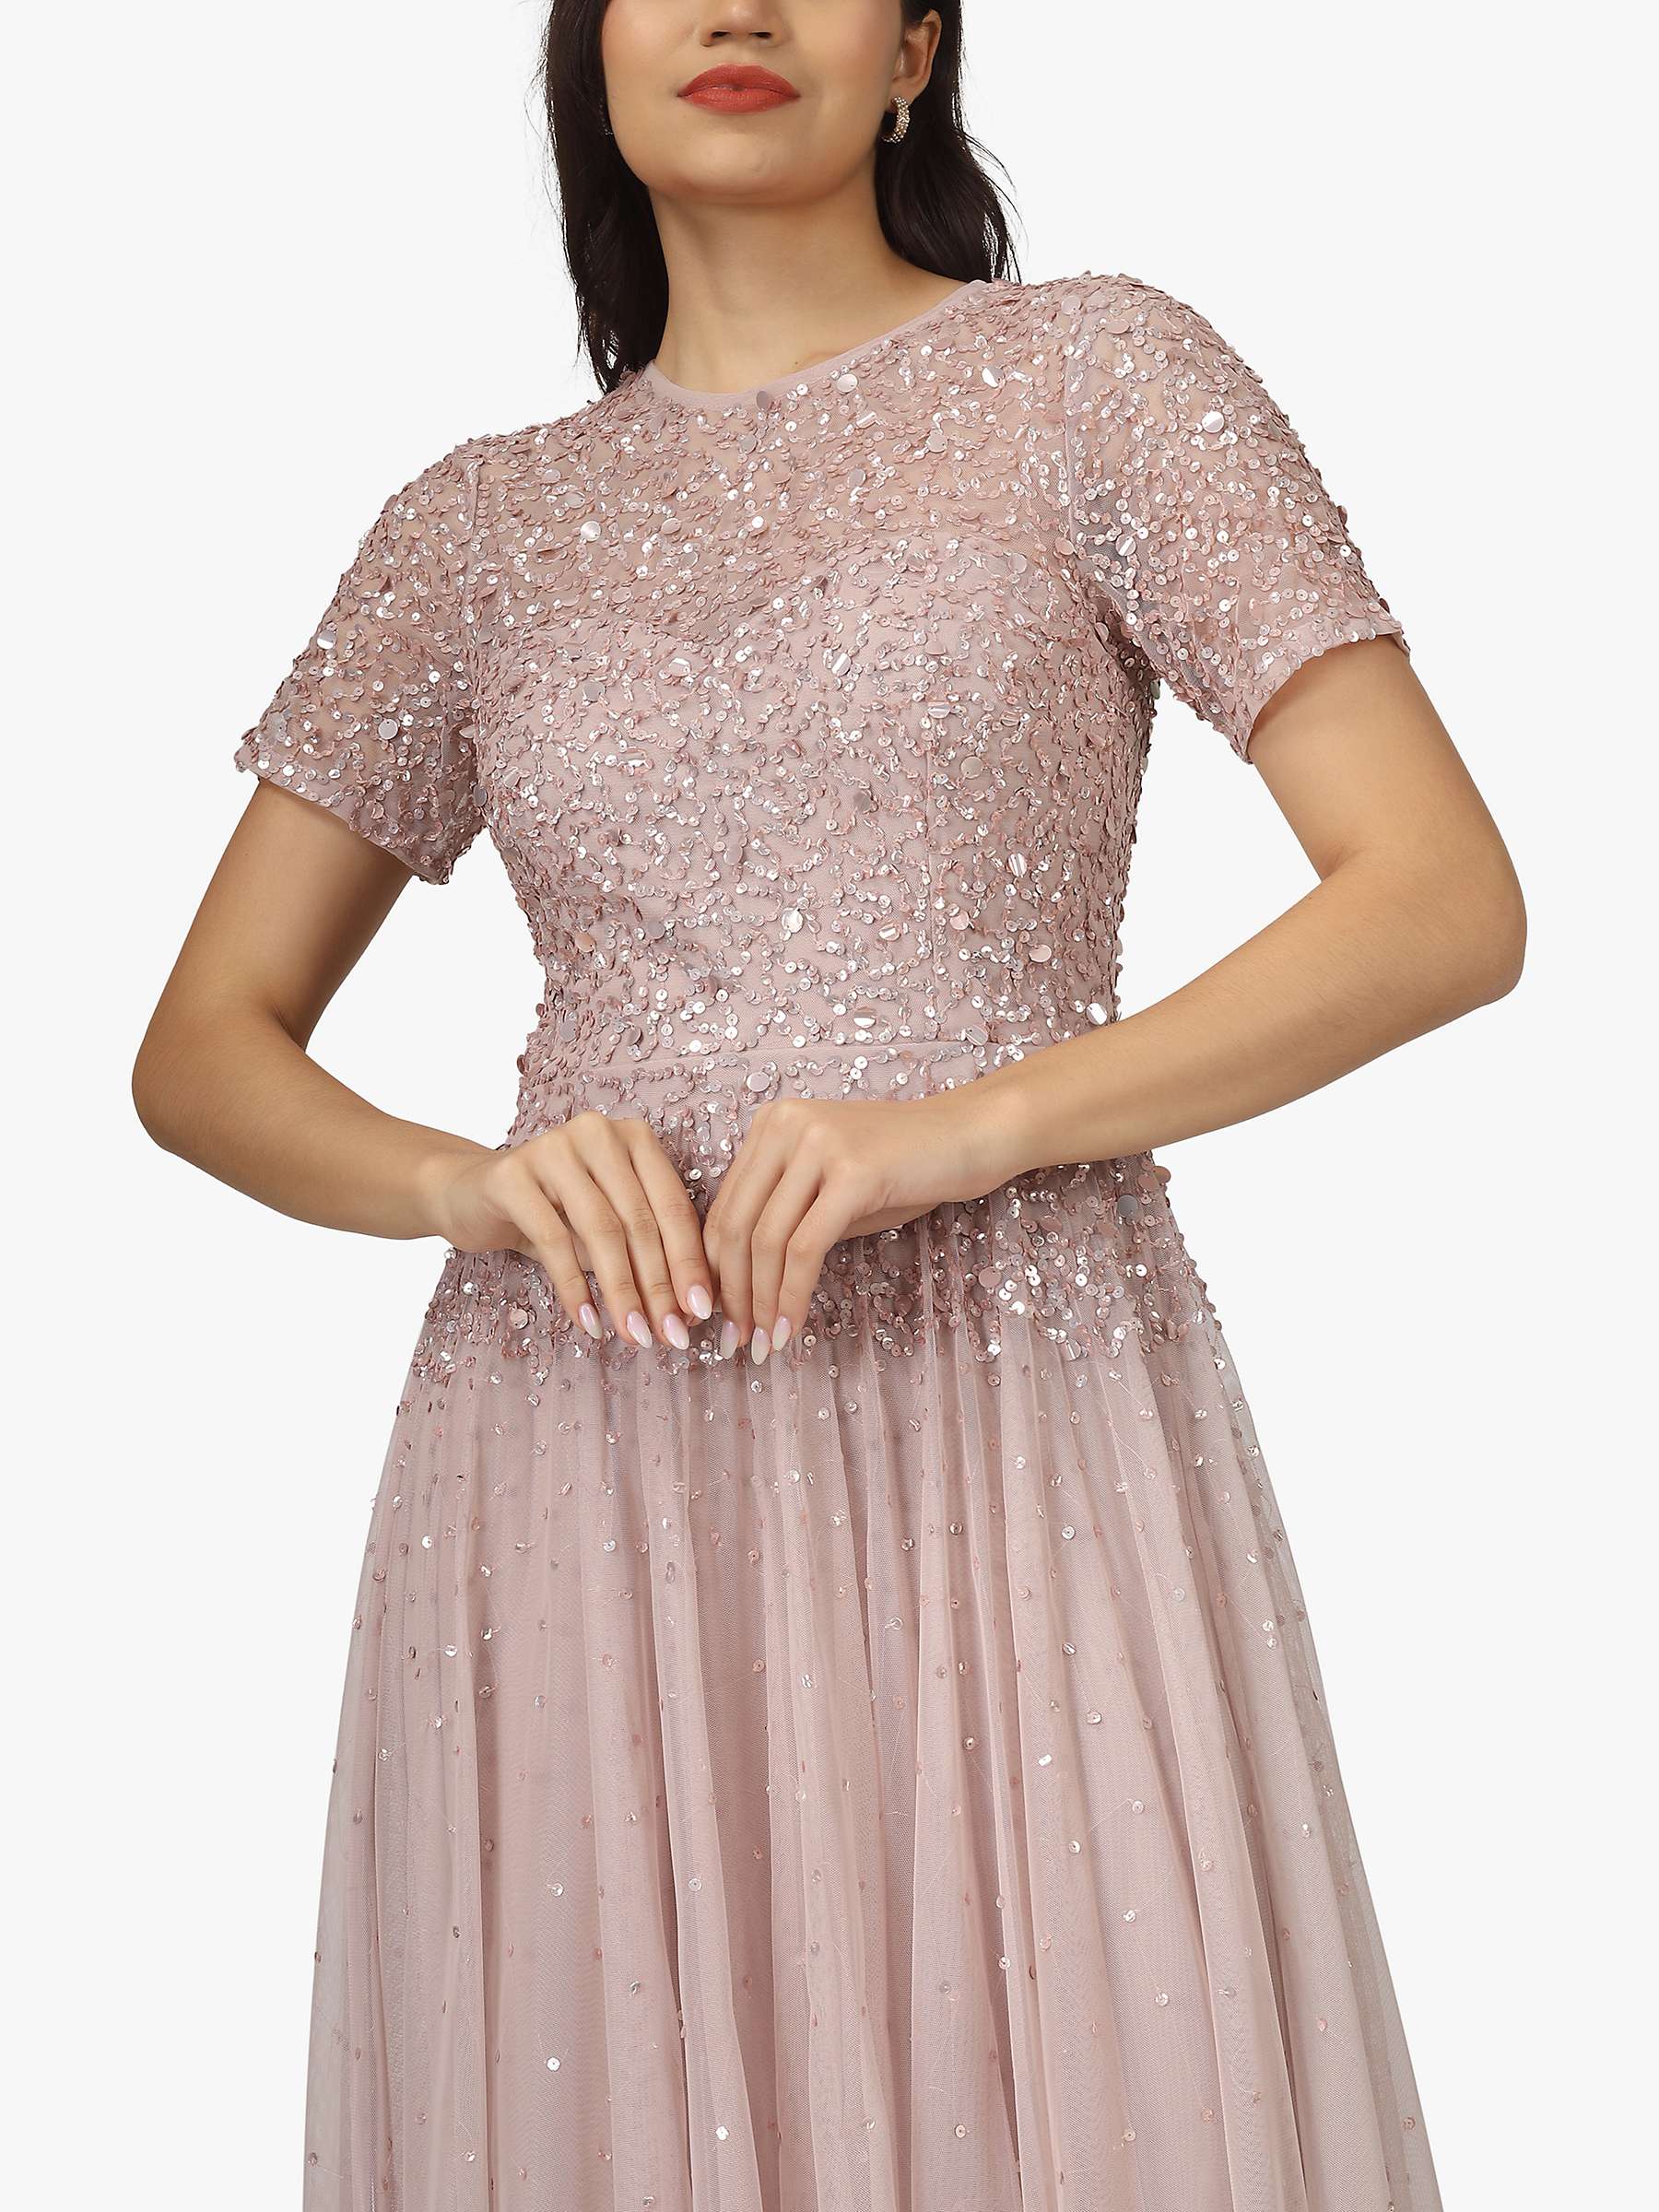 Buy Lace & Beads Montreal Embellished Maxi Dress Online at johnlewis.com